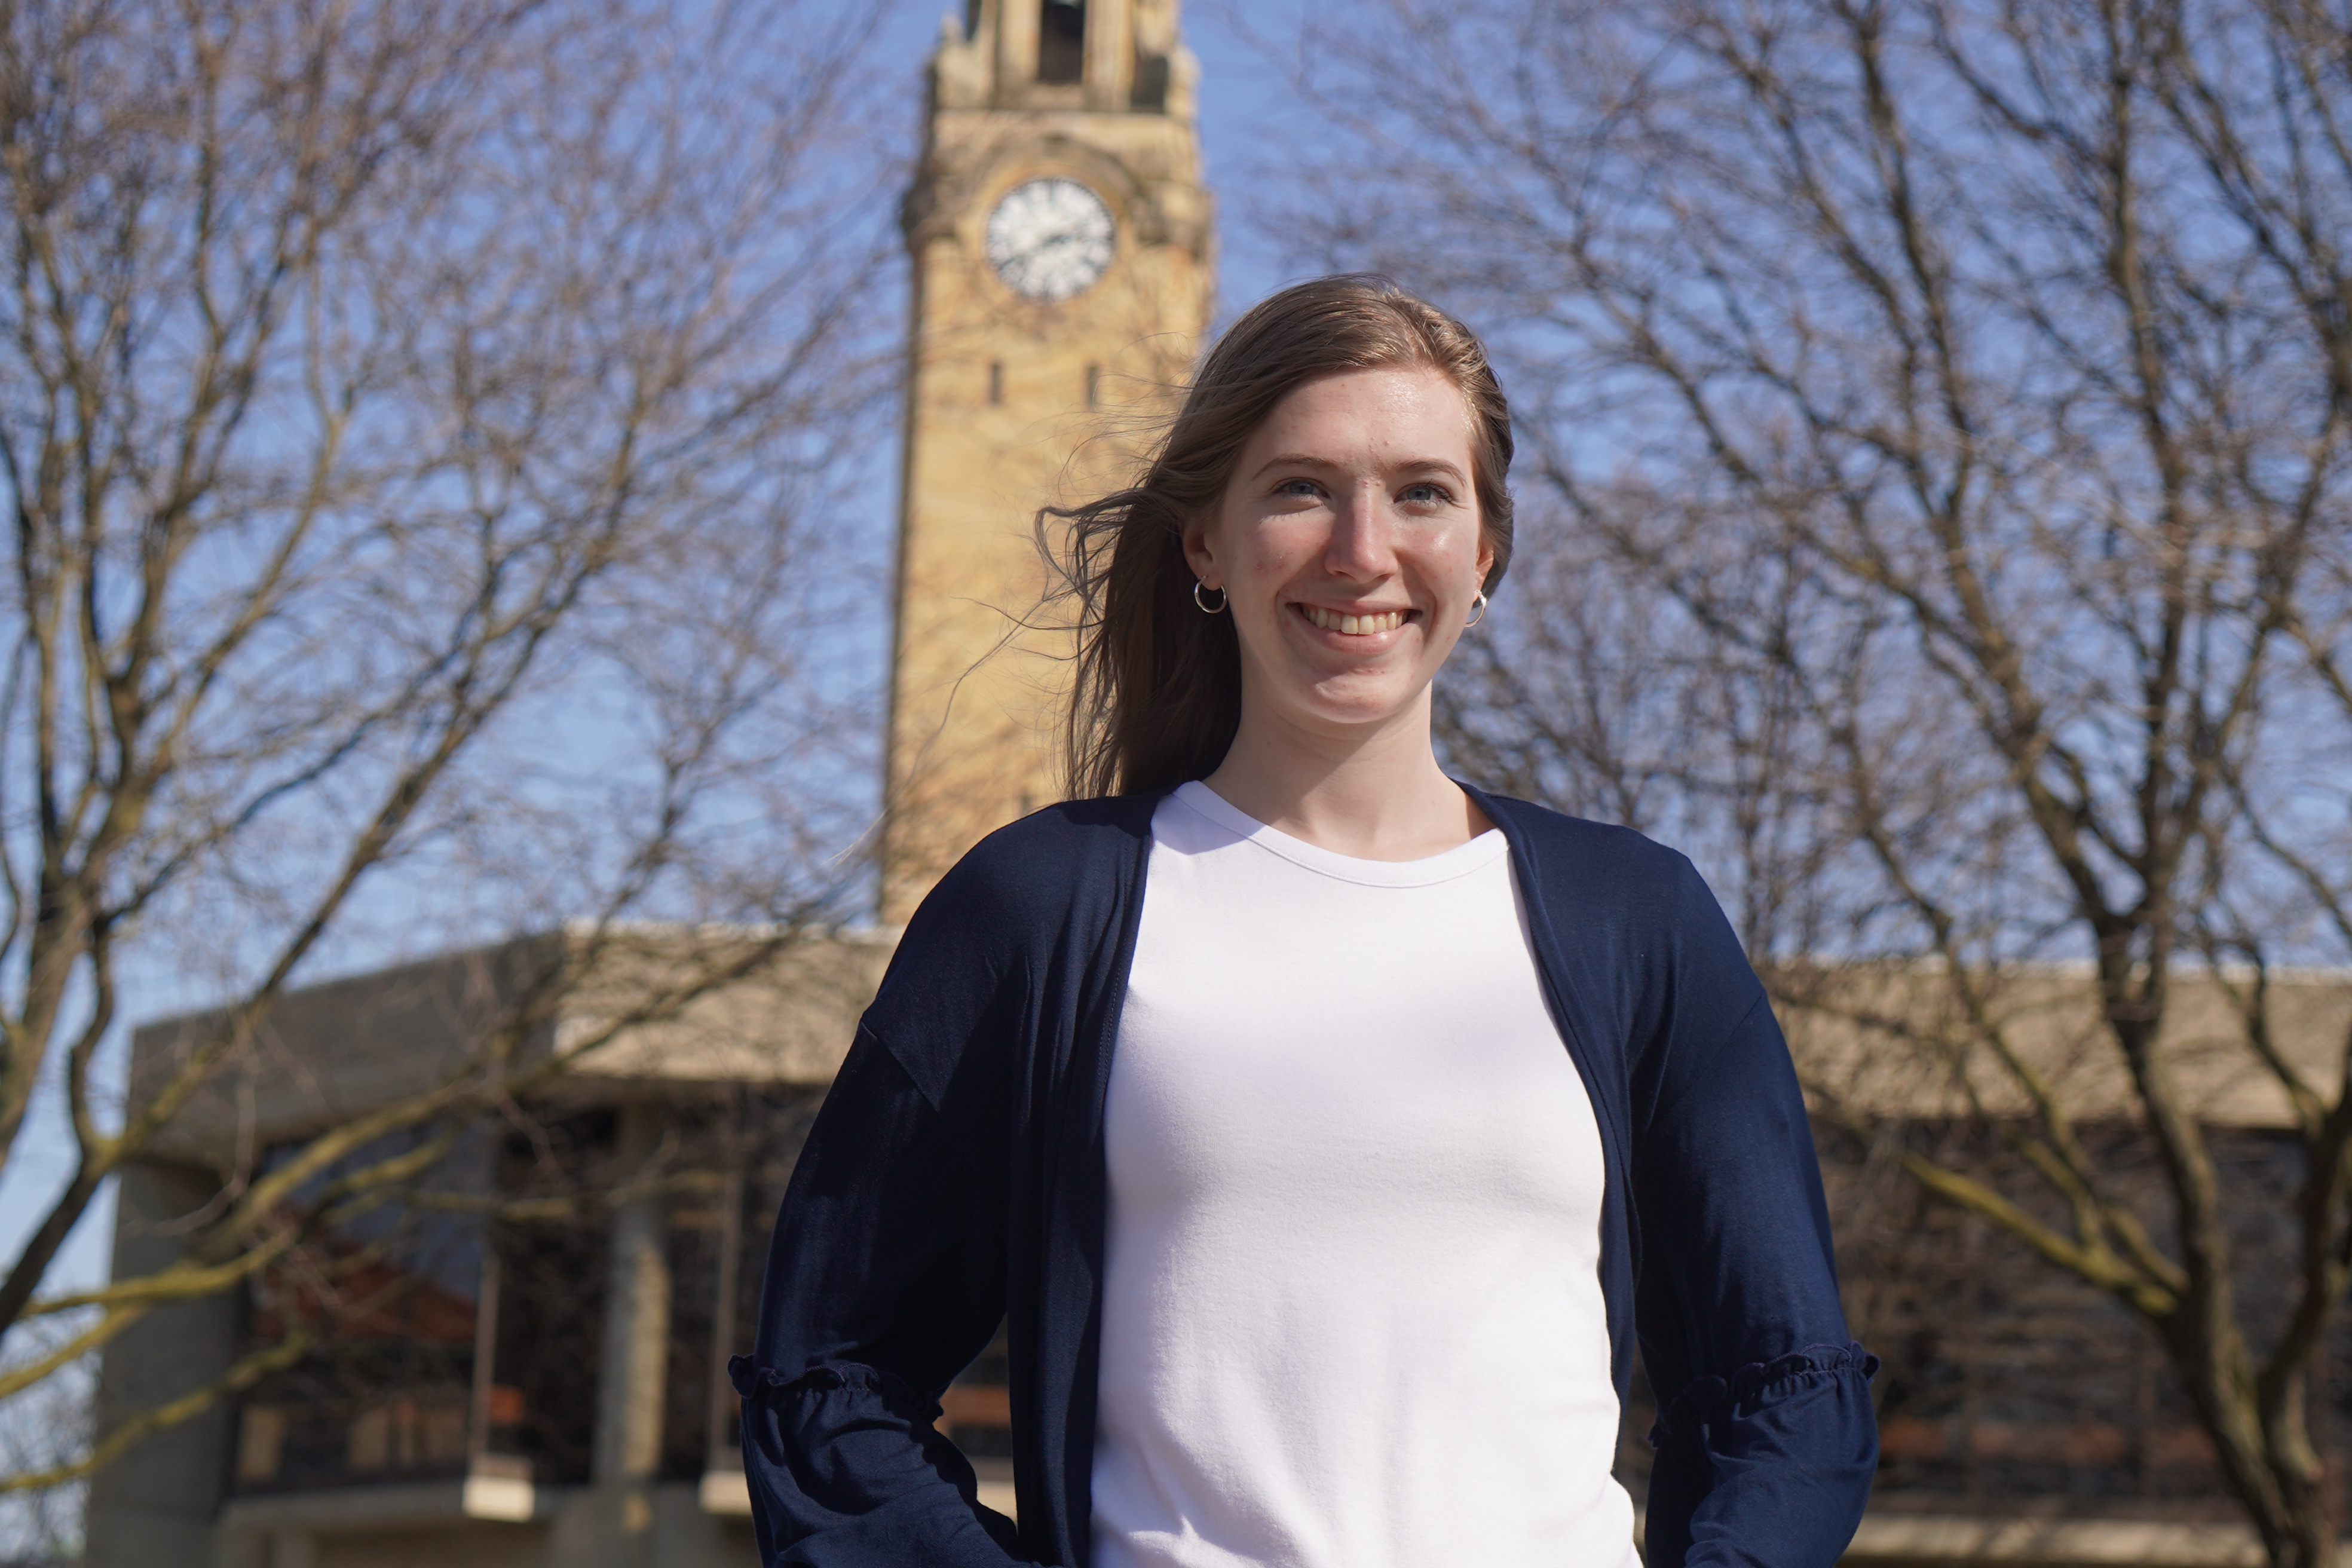 Patterson stands outdoors in front of the Student Union and clock tower.